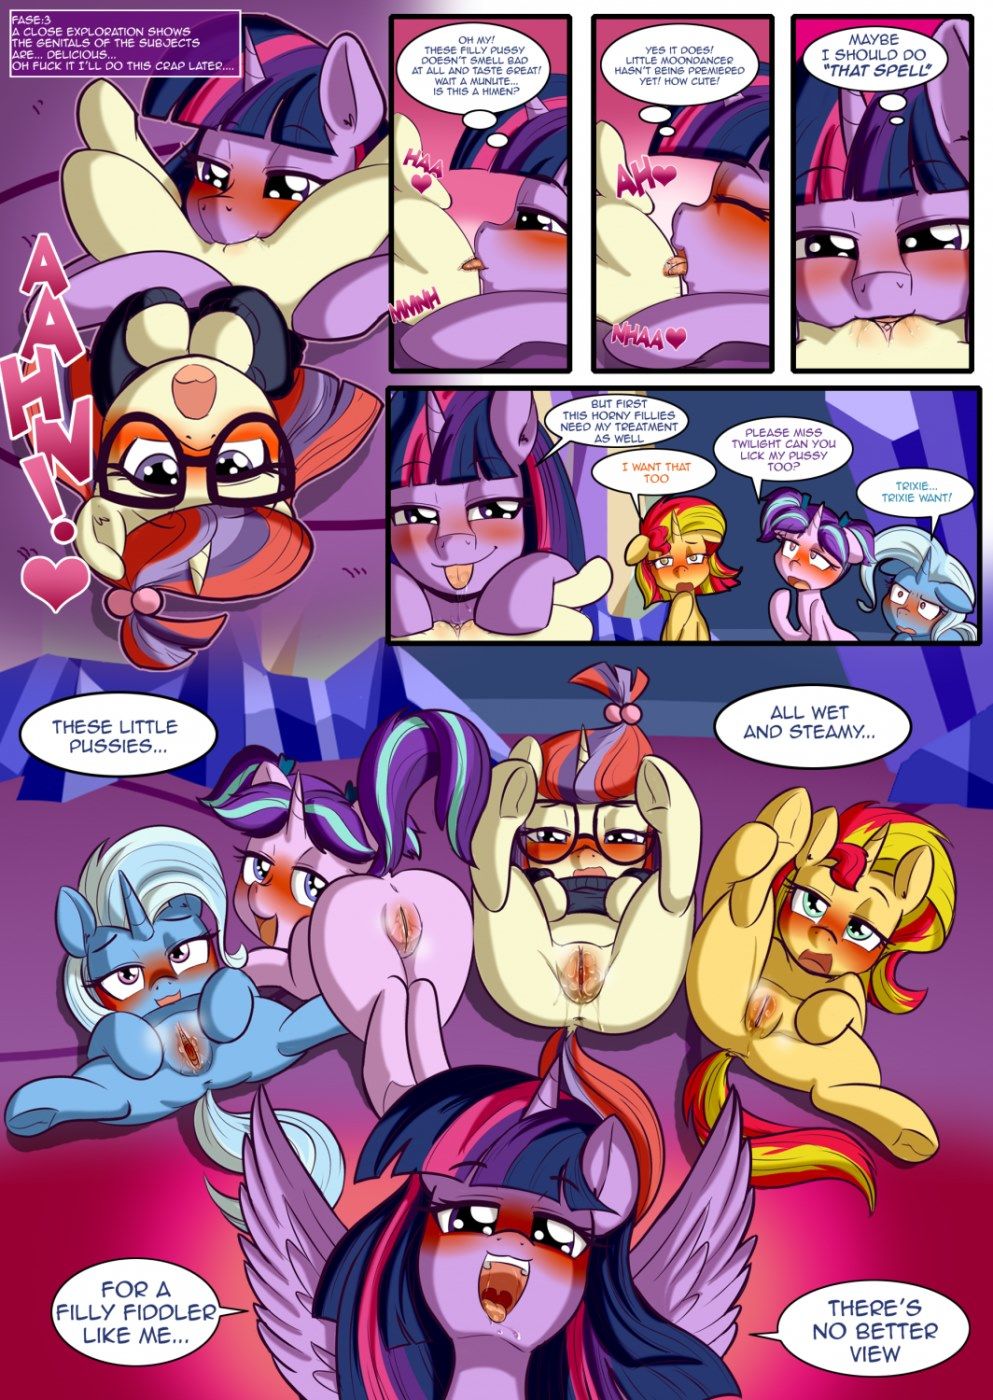 Back to Magic Kindergarten - Little Pony page 6